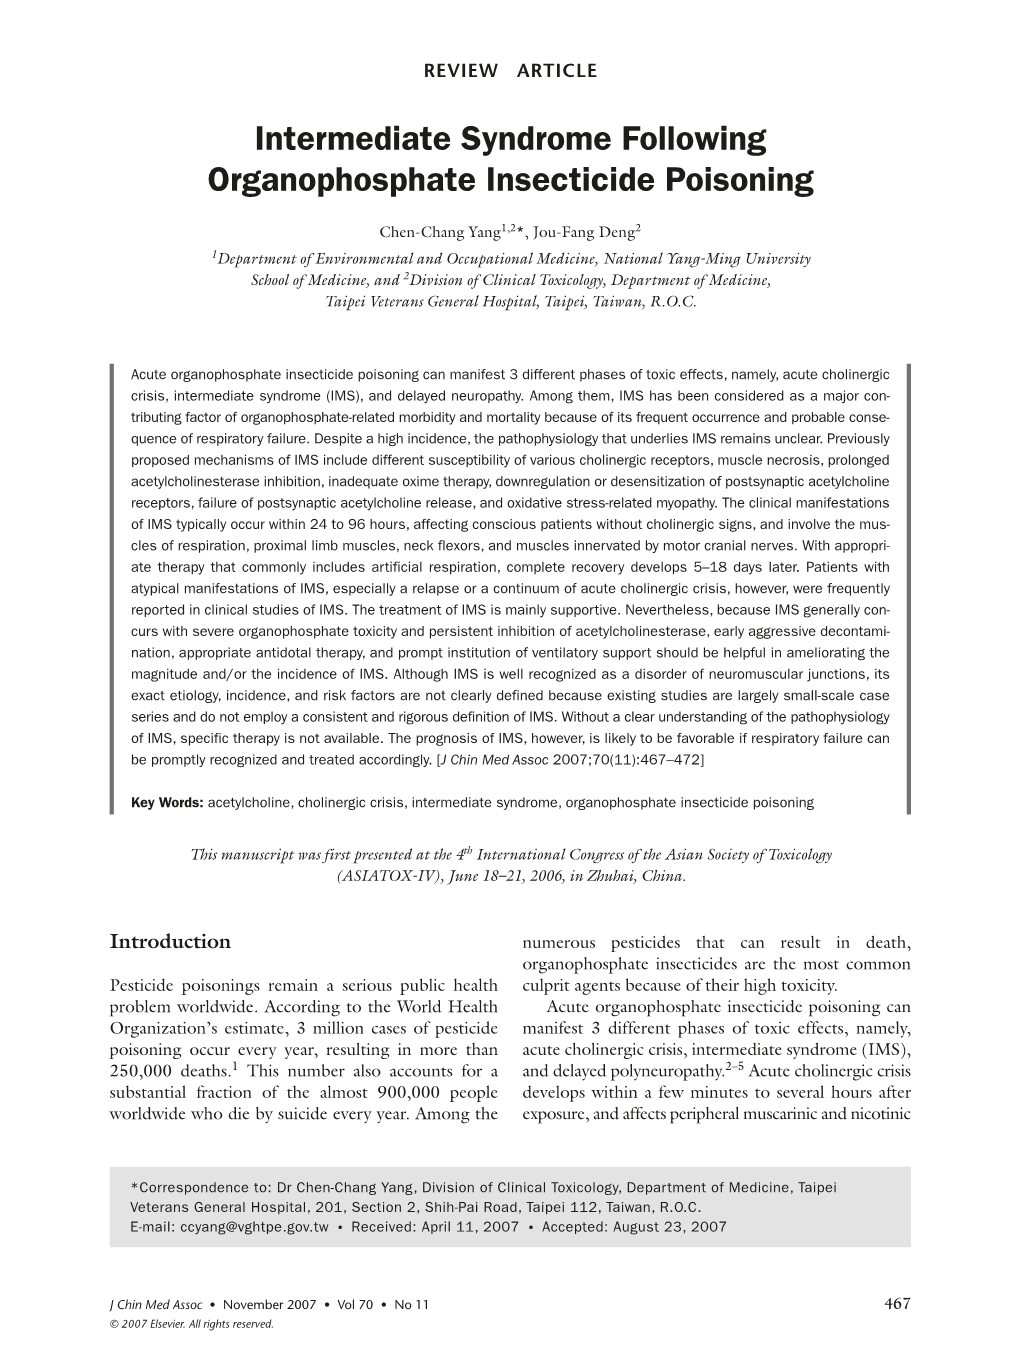 Intermediate Syndrome Following Organophosphate Insecticide Poisoning